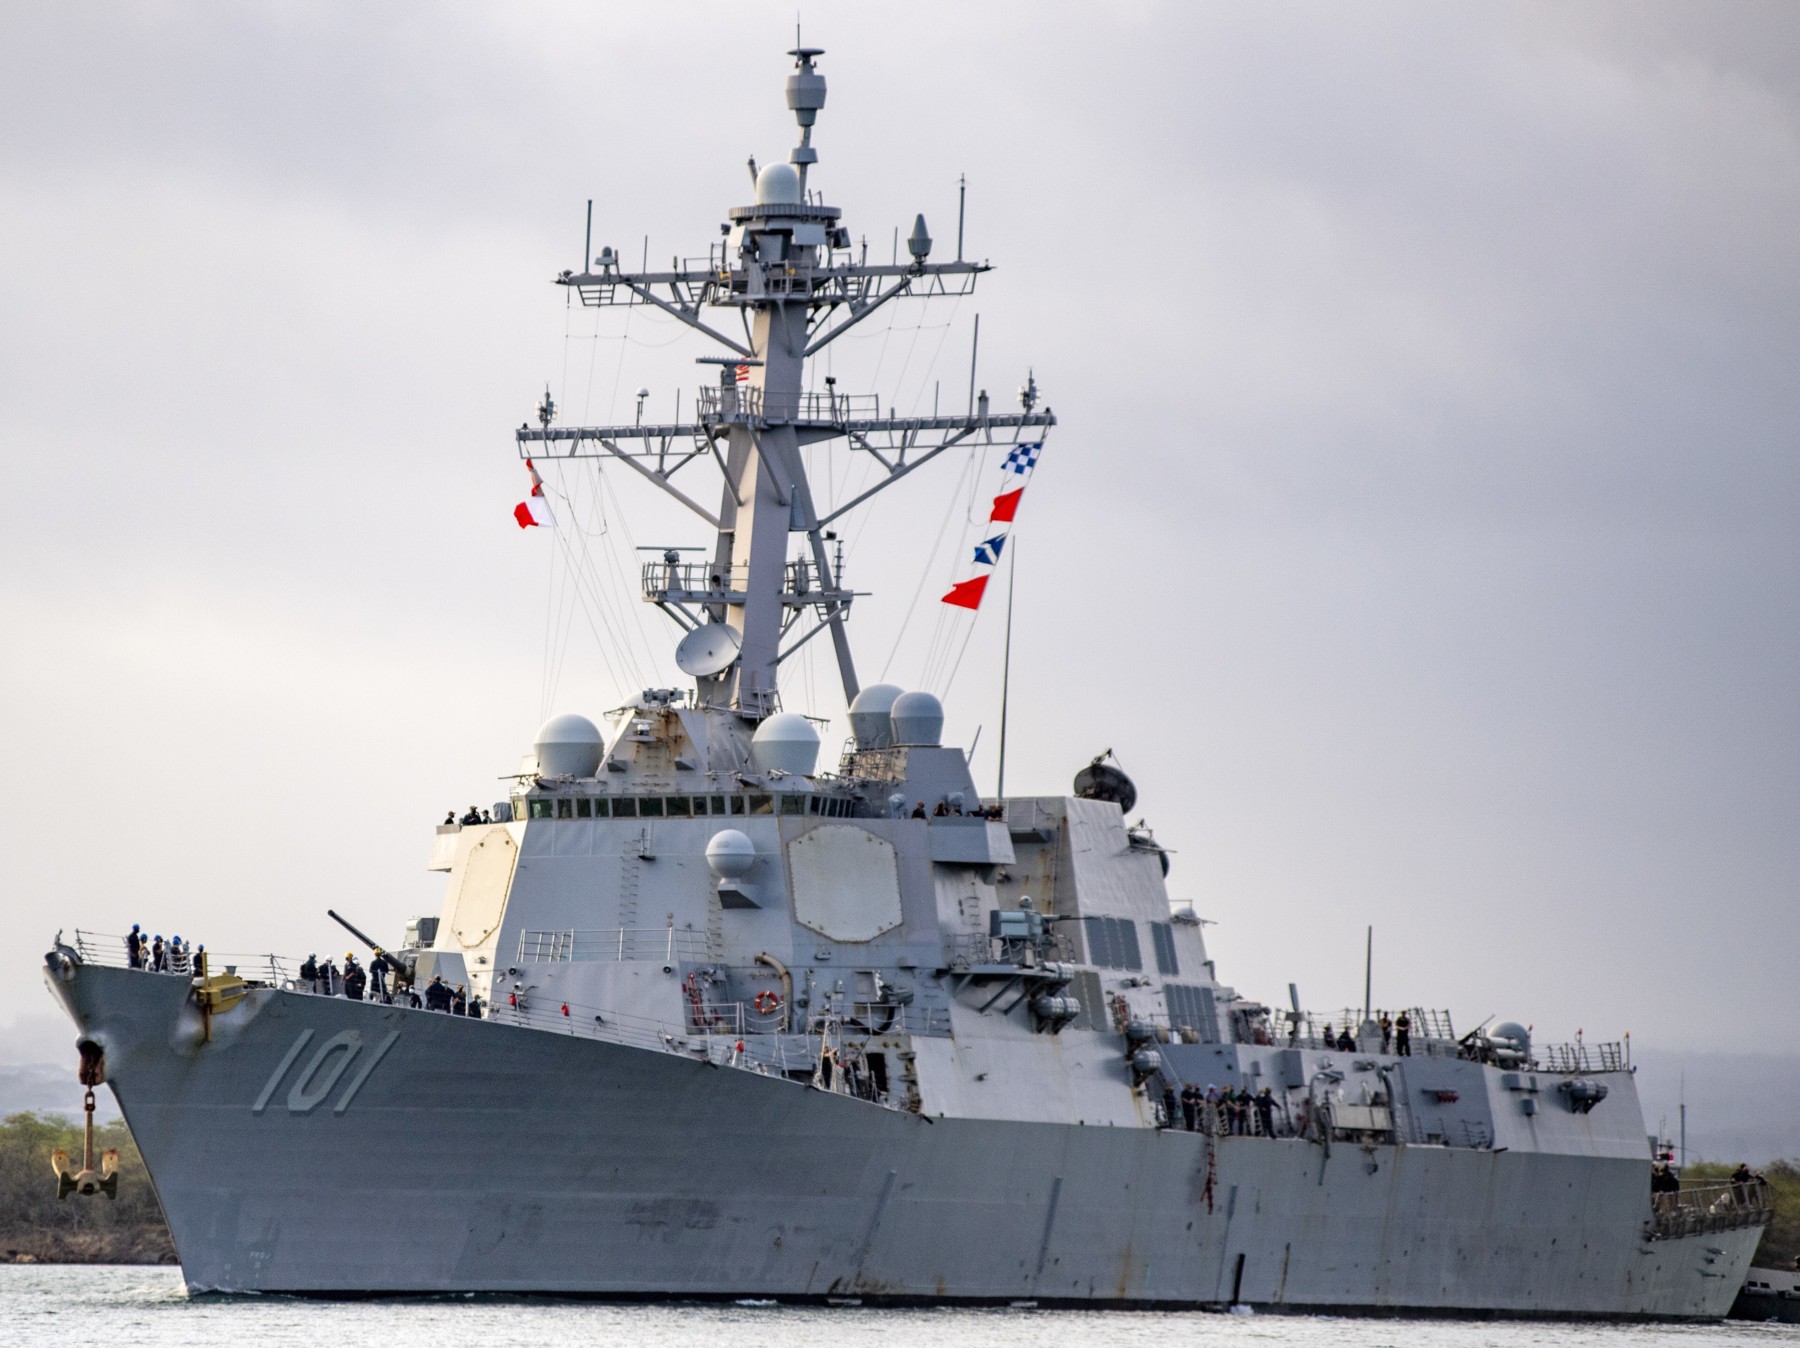 ddg-101 uss gridley arleigh burke class guided missile destroyer aegis us navy joint base pearl harbor hickam hawaii rimpac 81